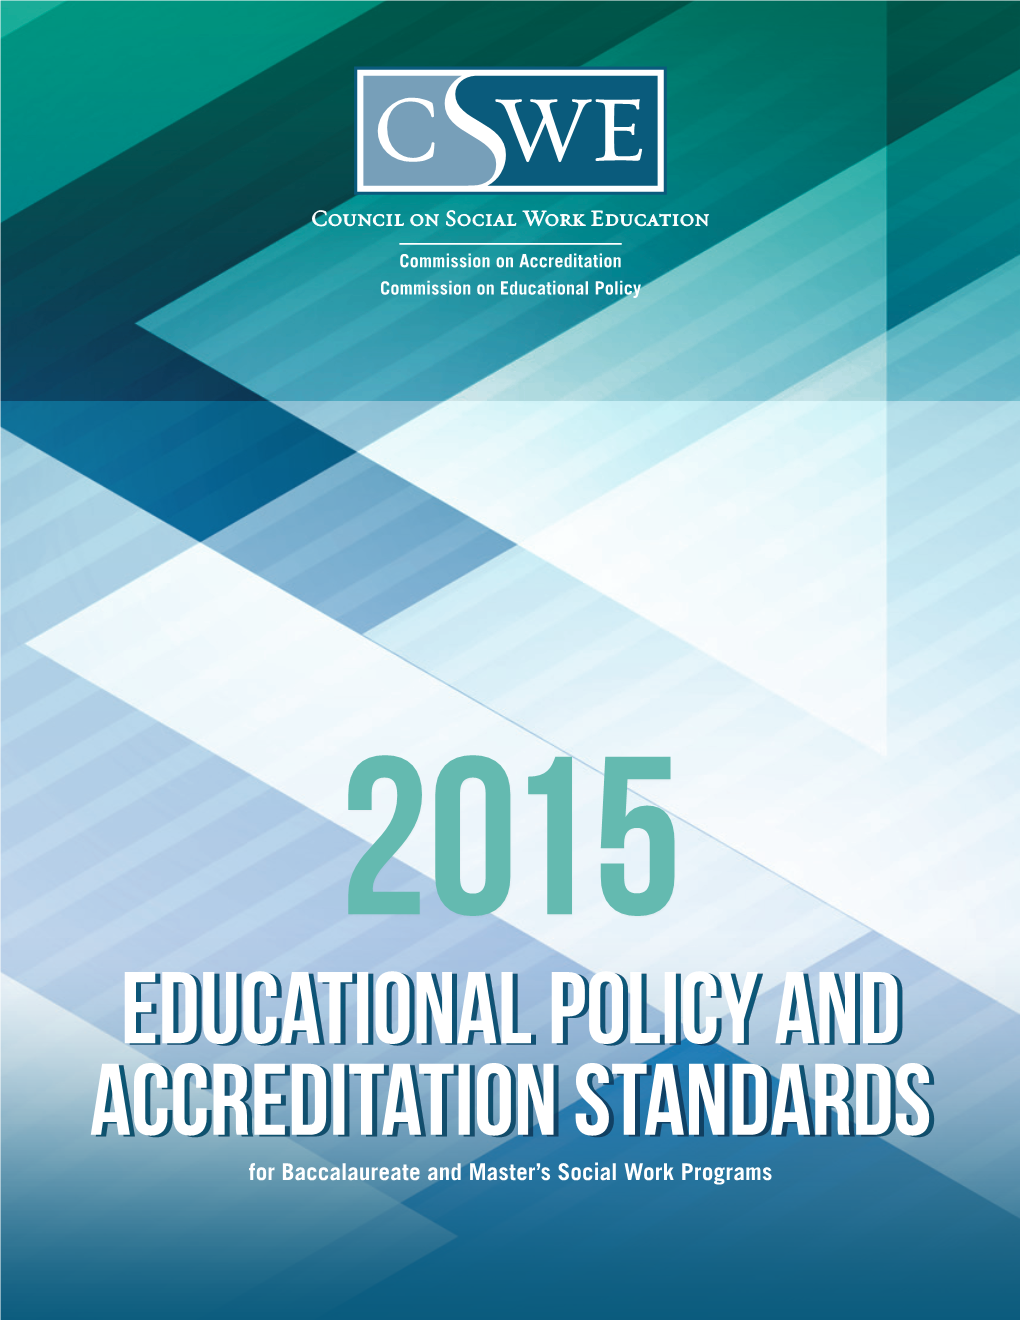 Educational Policy and Accreditation Standards